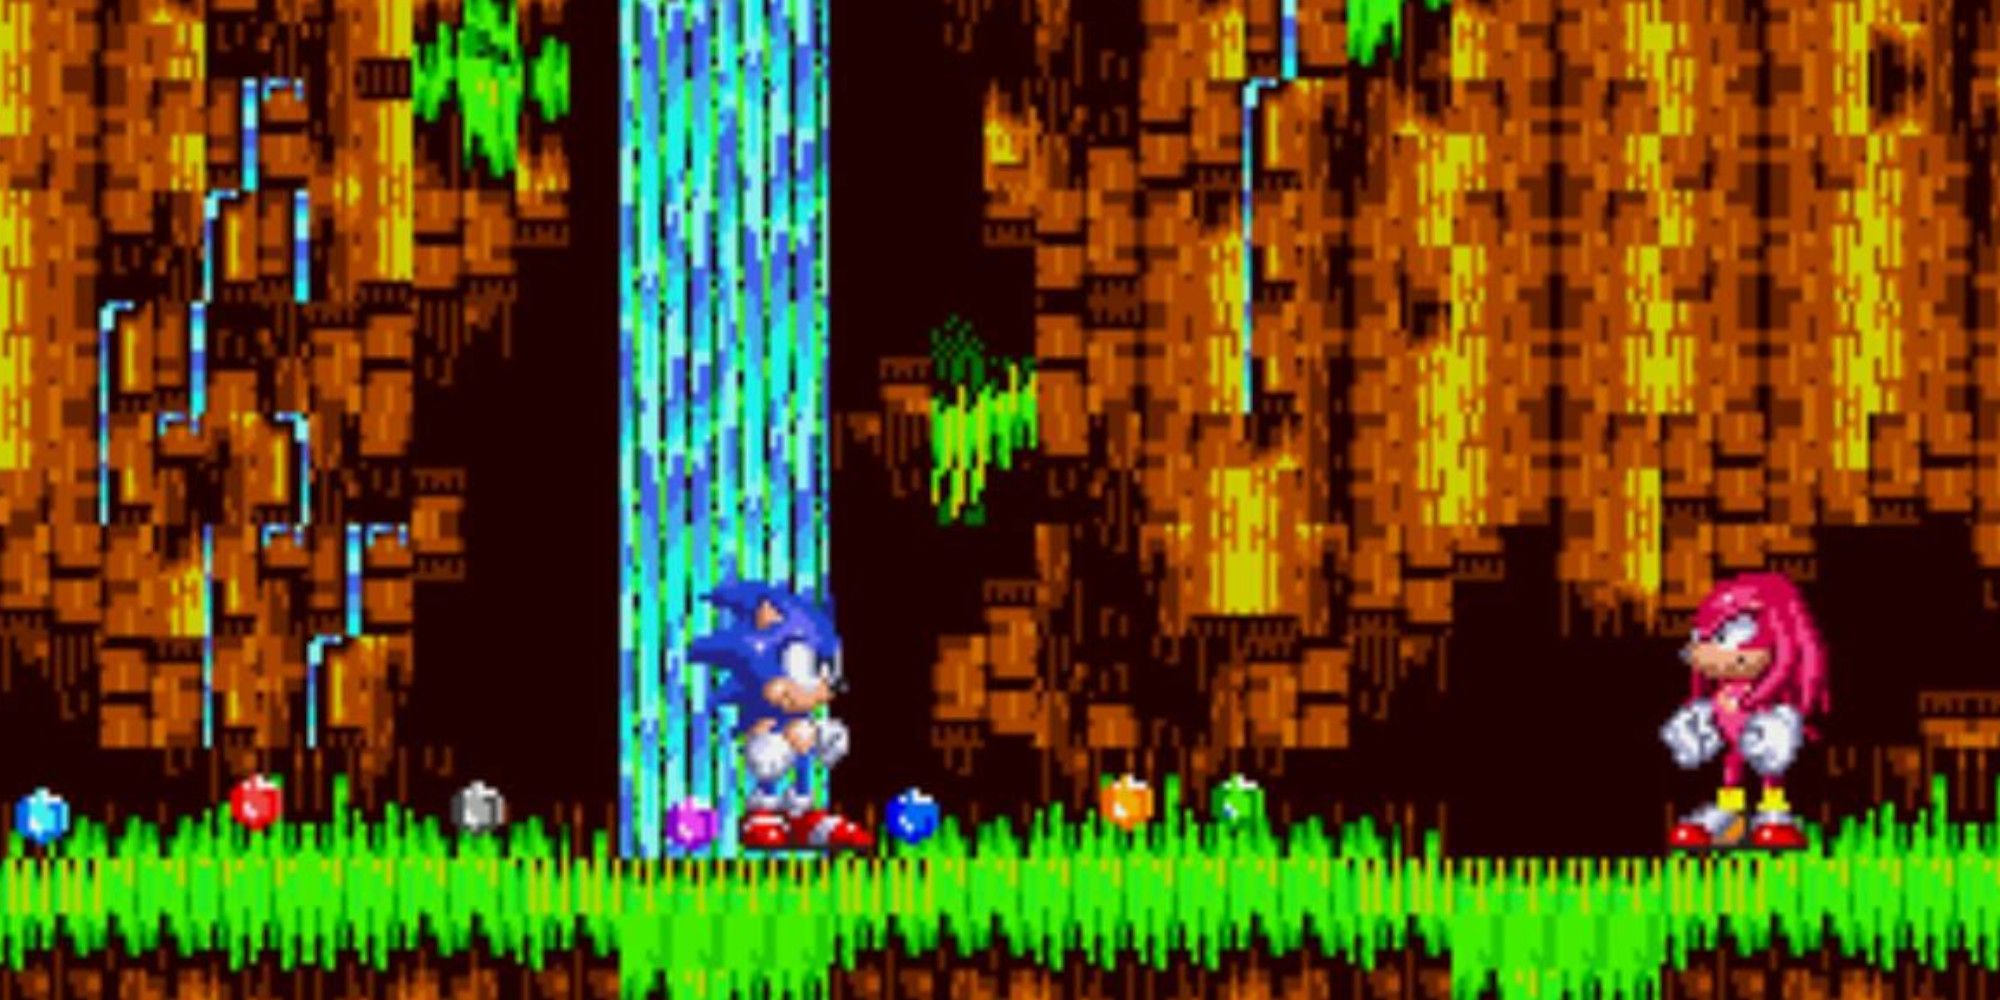 Sonic and Knuckles' first encounter in Sonic The Hedgehog 3